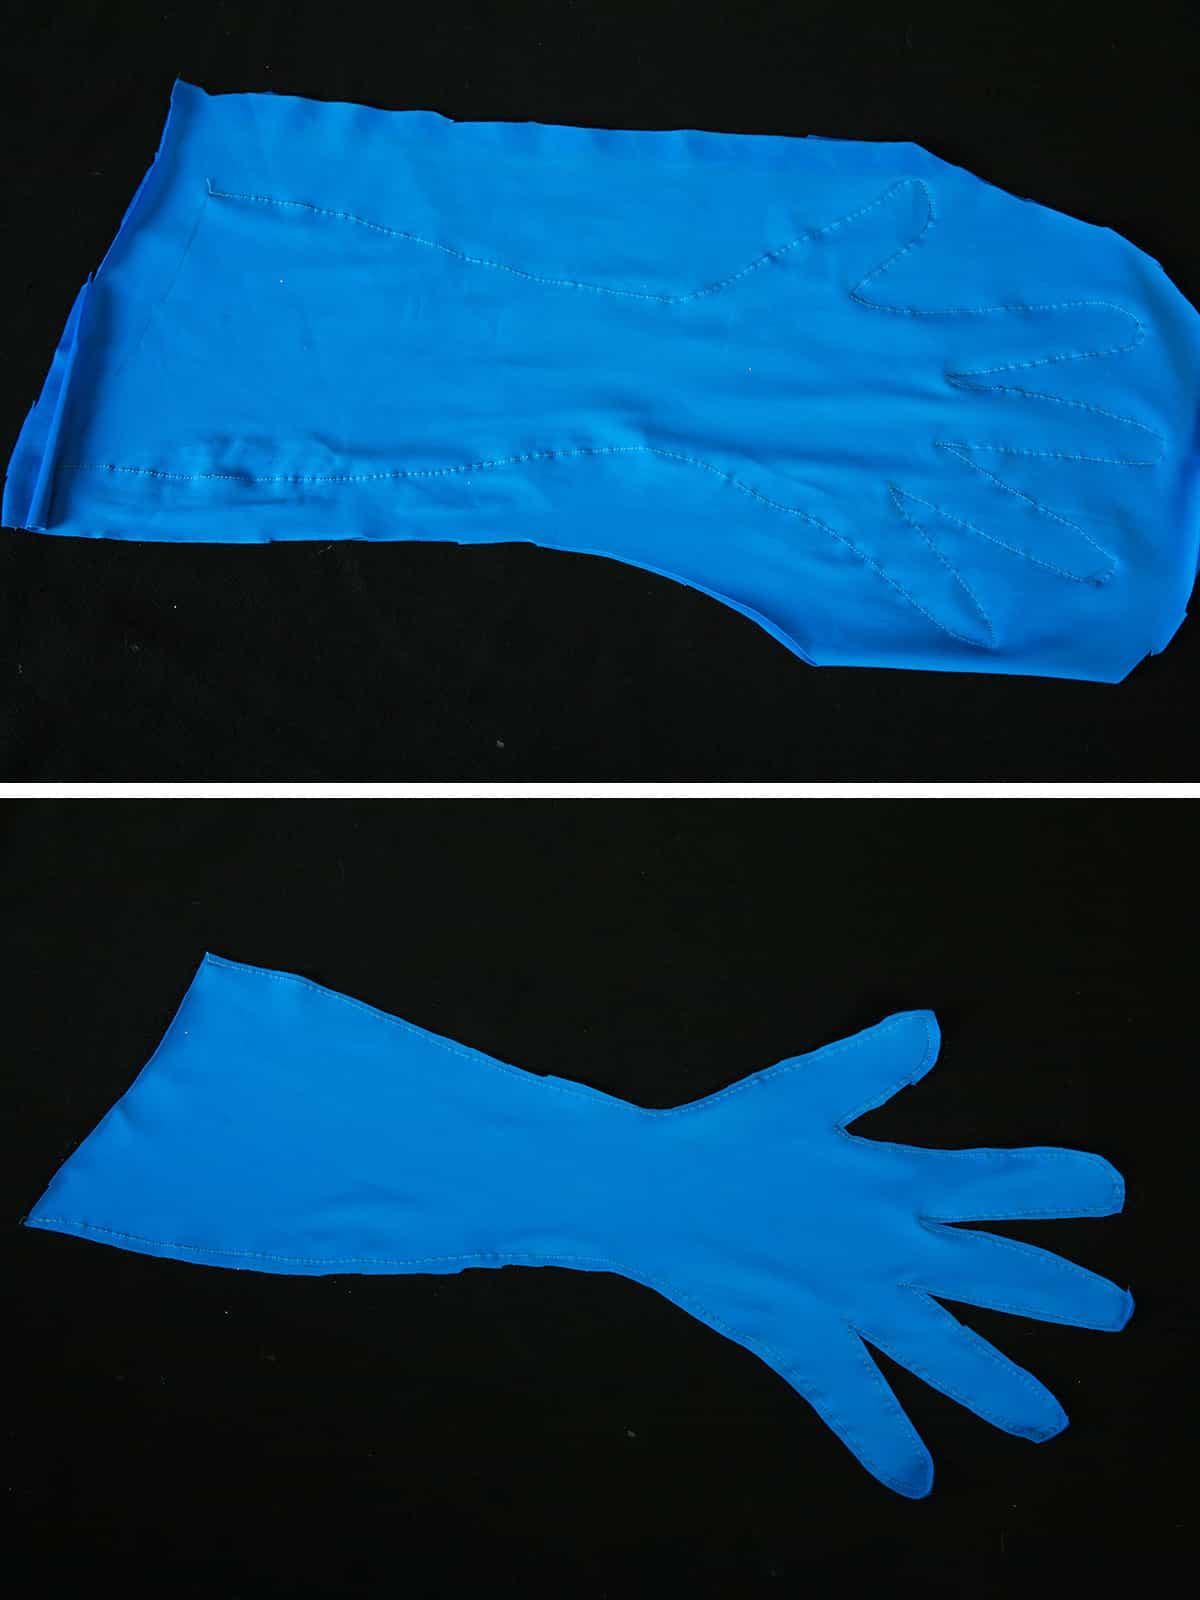 A two part compilation image showing a blue spandex glove, before and after being trimmed.